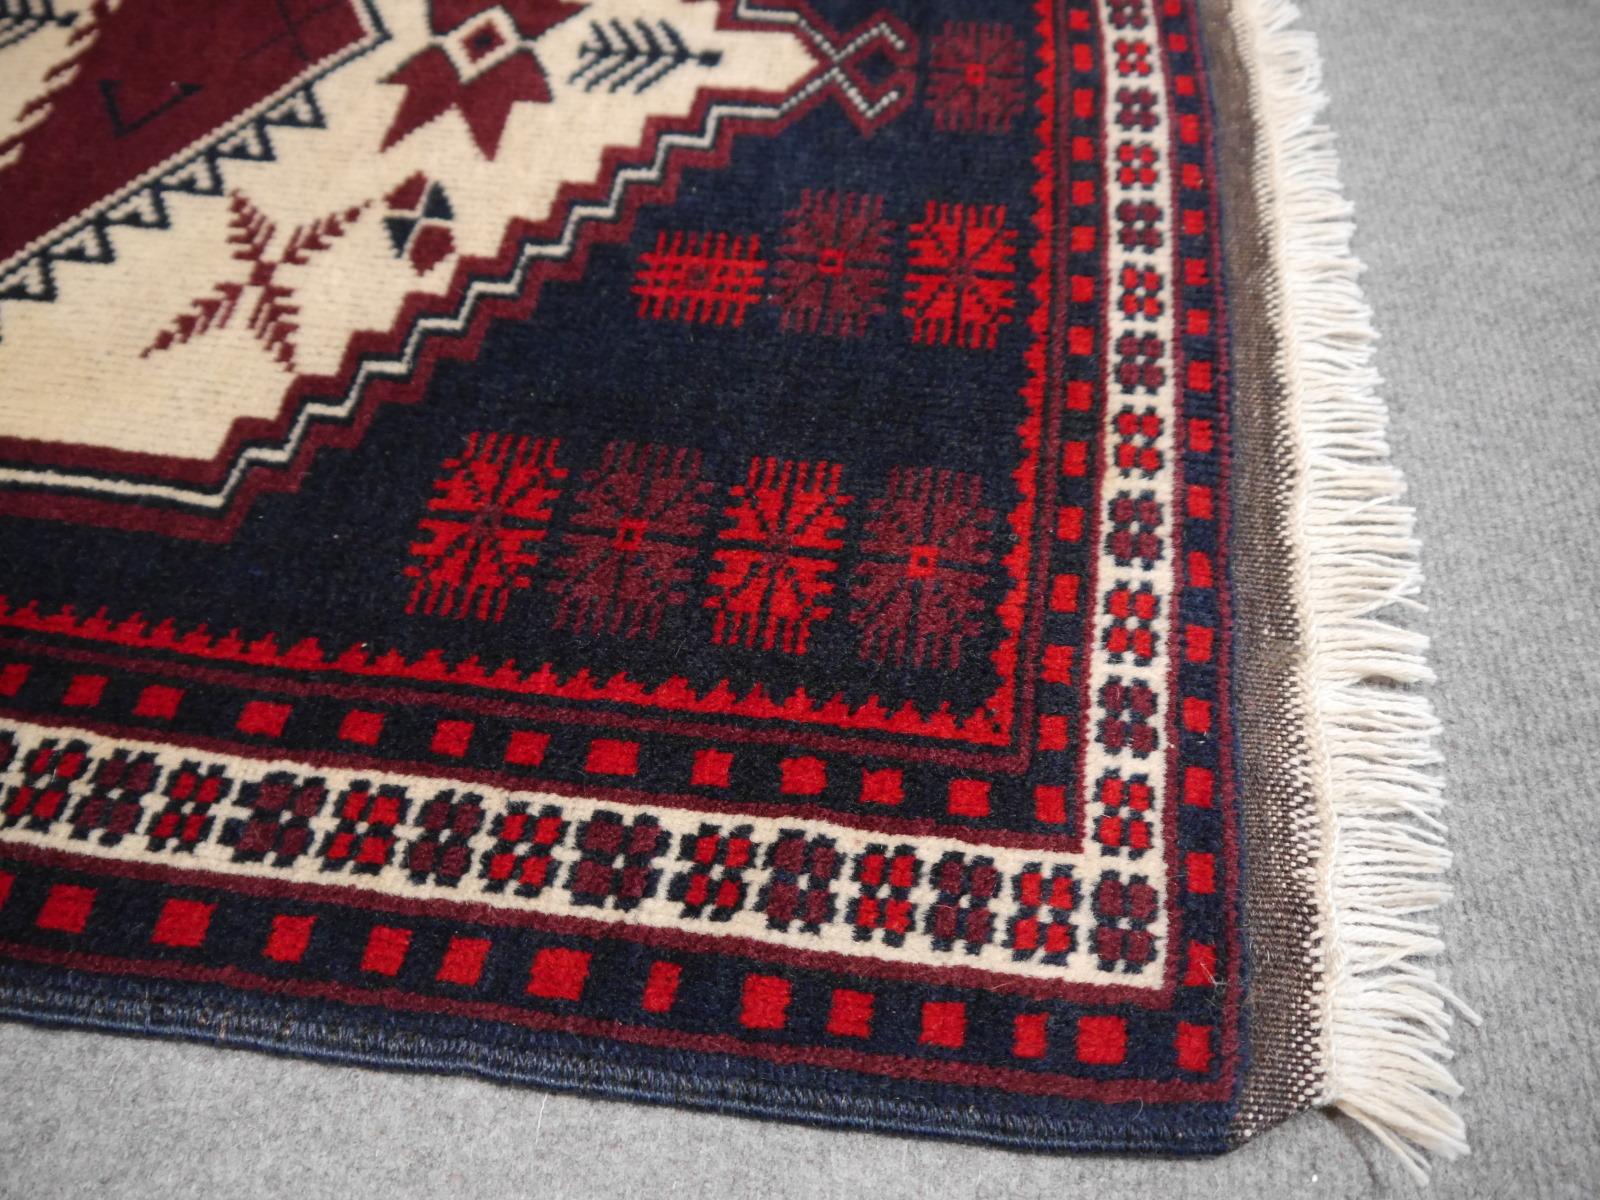 20th Century Vintage Turkish Rug Slightly Worn Distressed Industrial Look Hand-Knotted For Sale